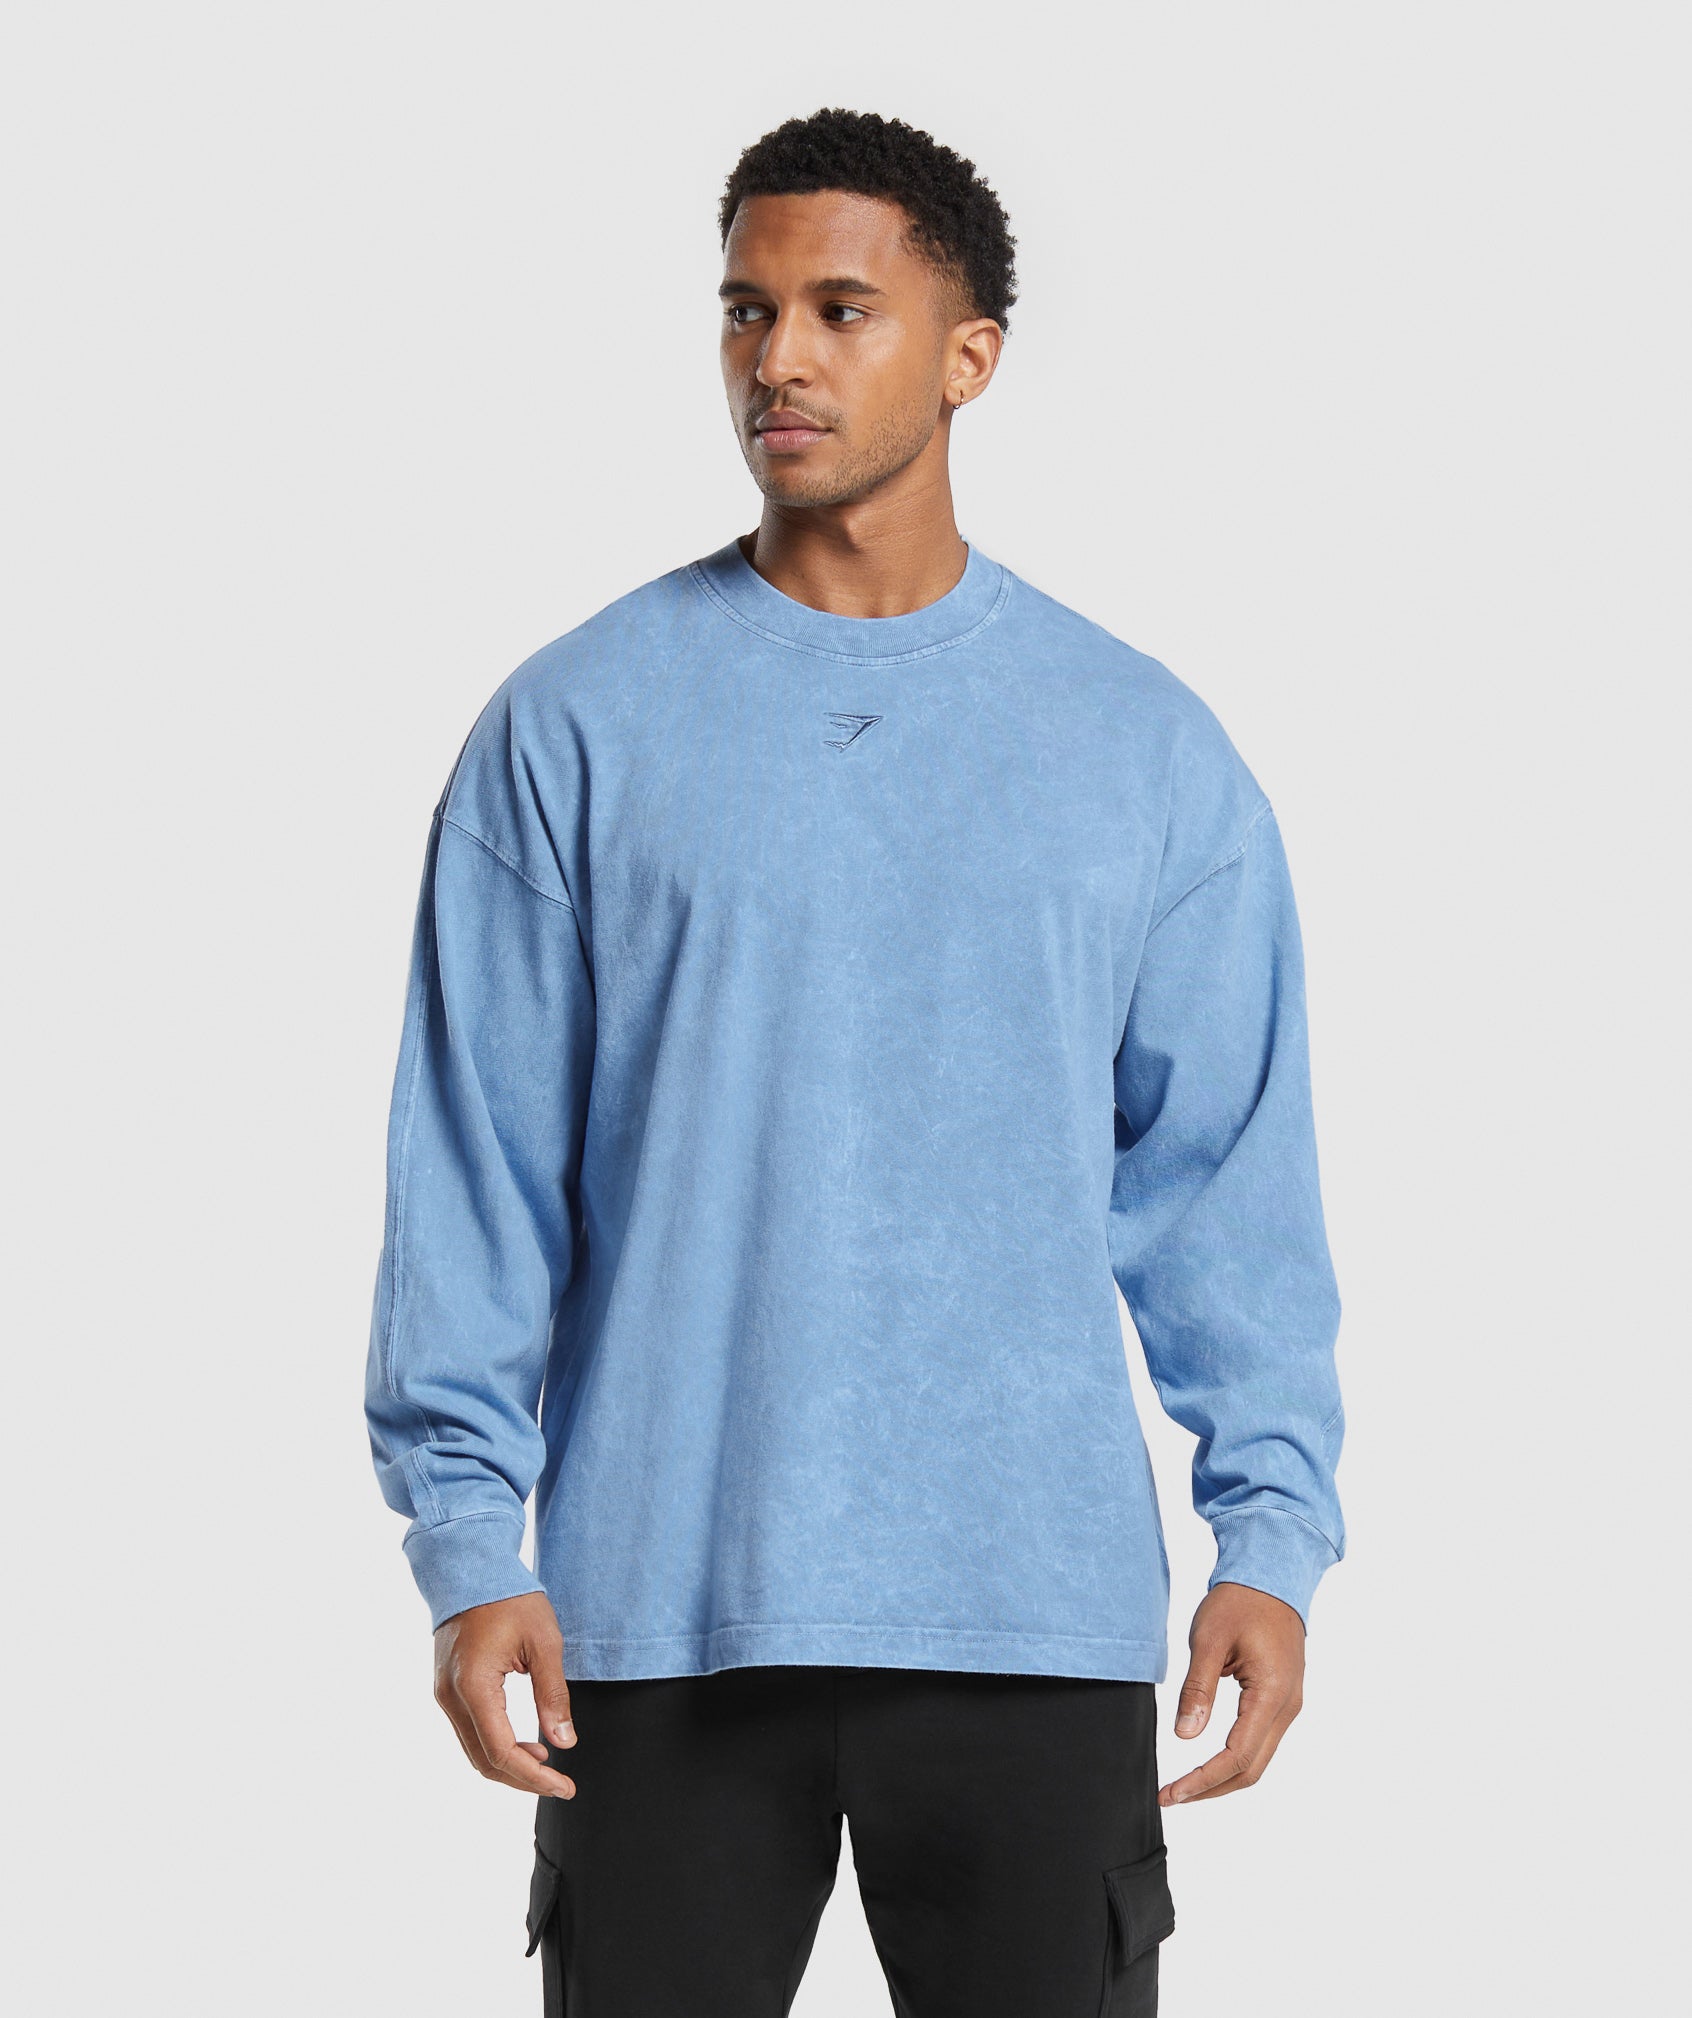 Rest Day Washed Long Sleeve T-Shirt in Faded Blue